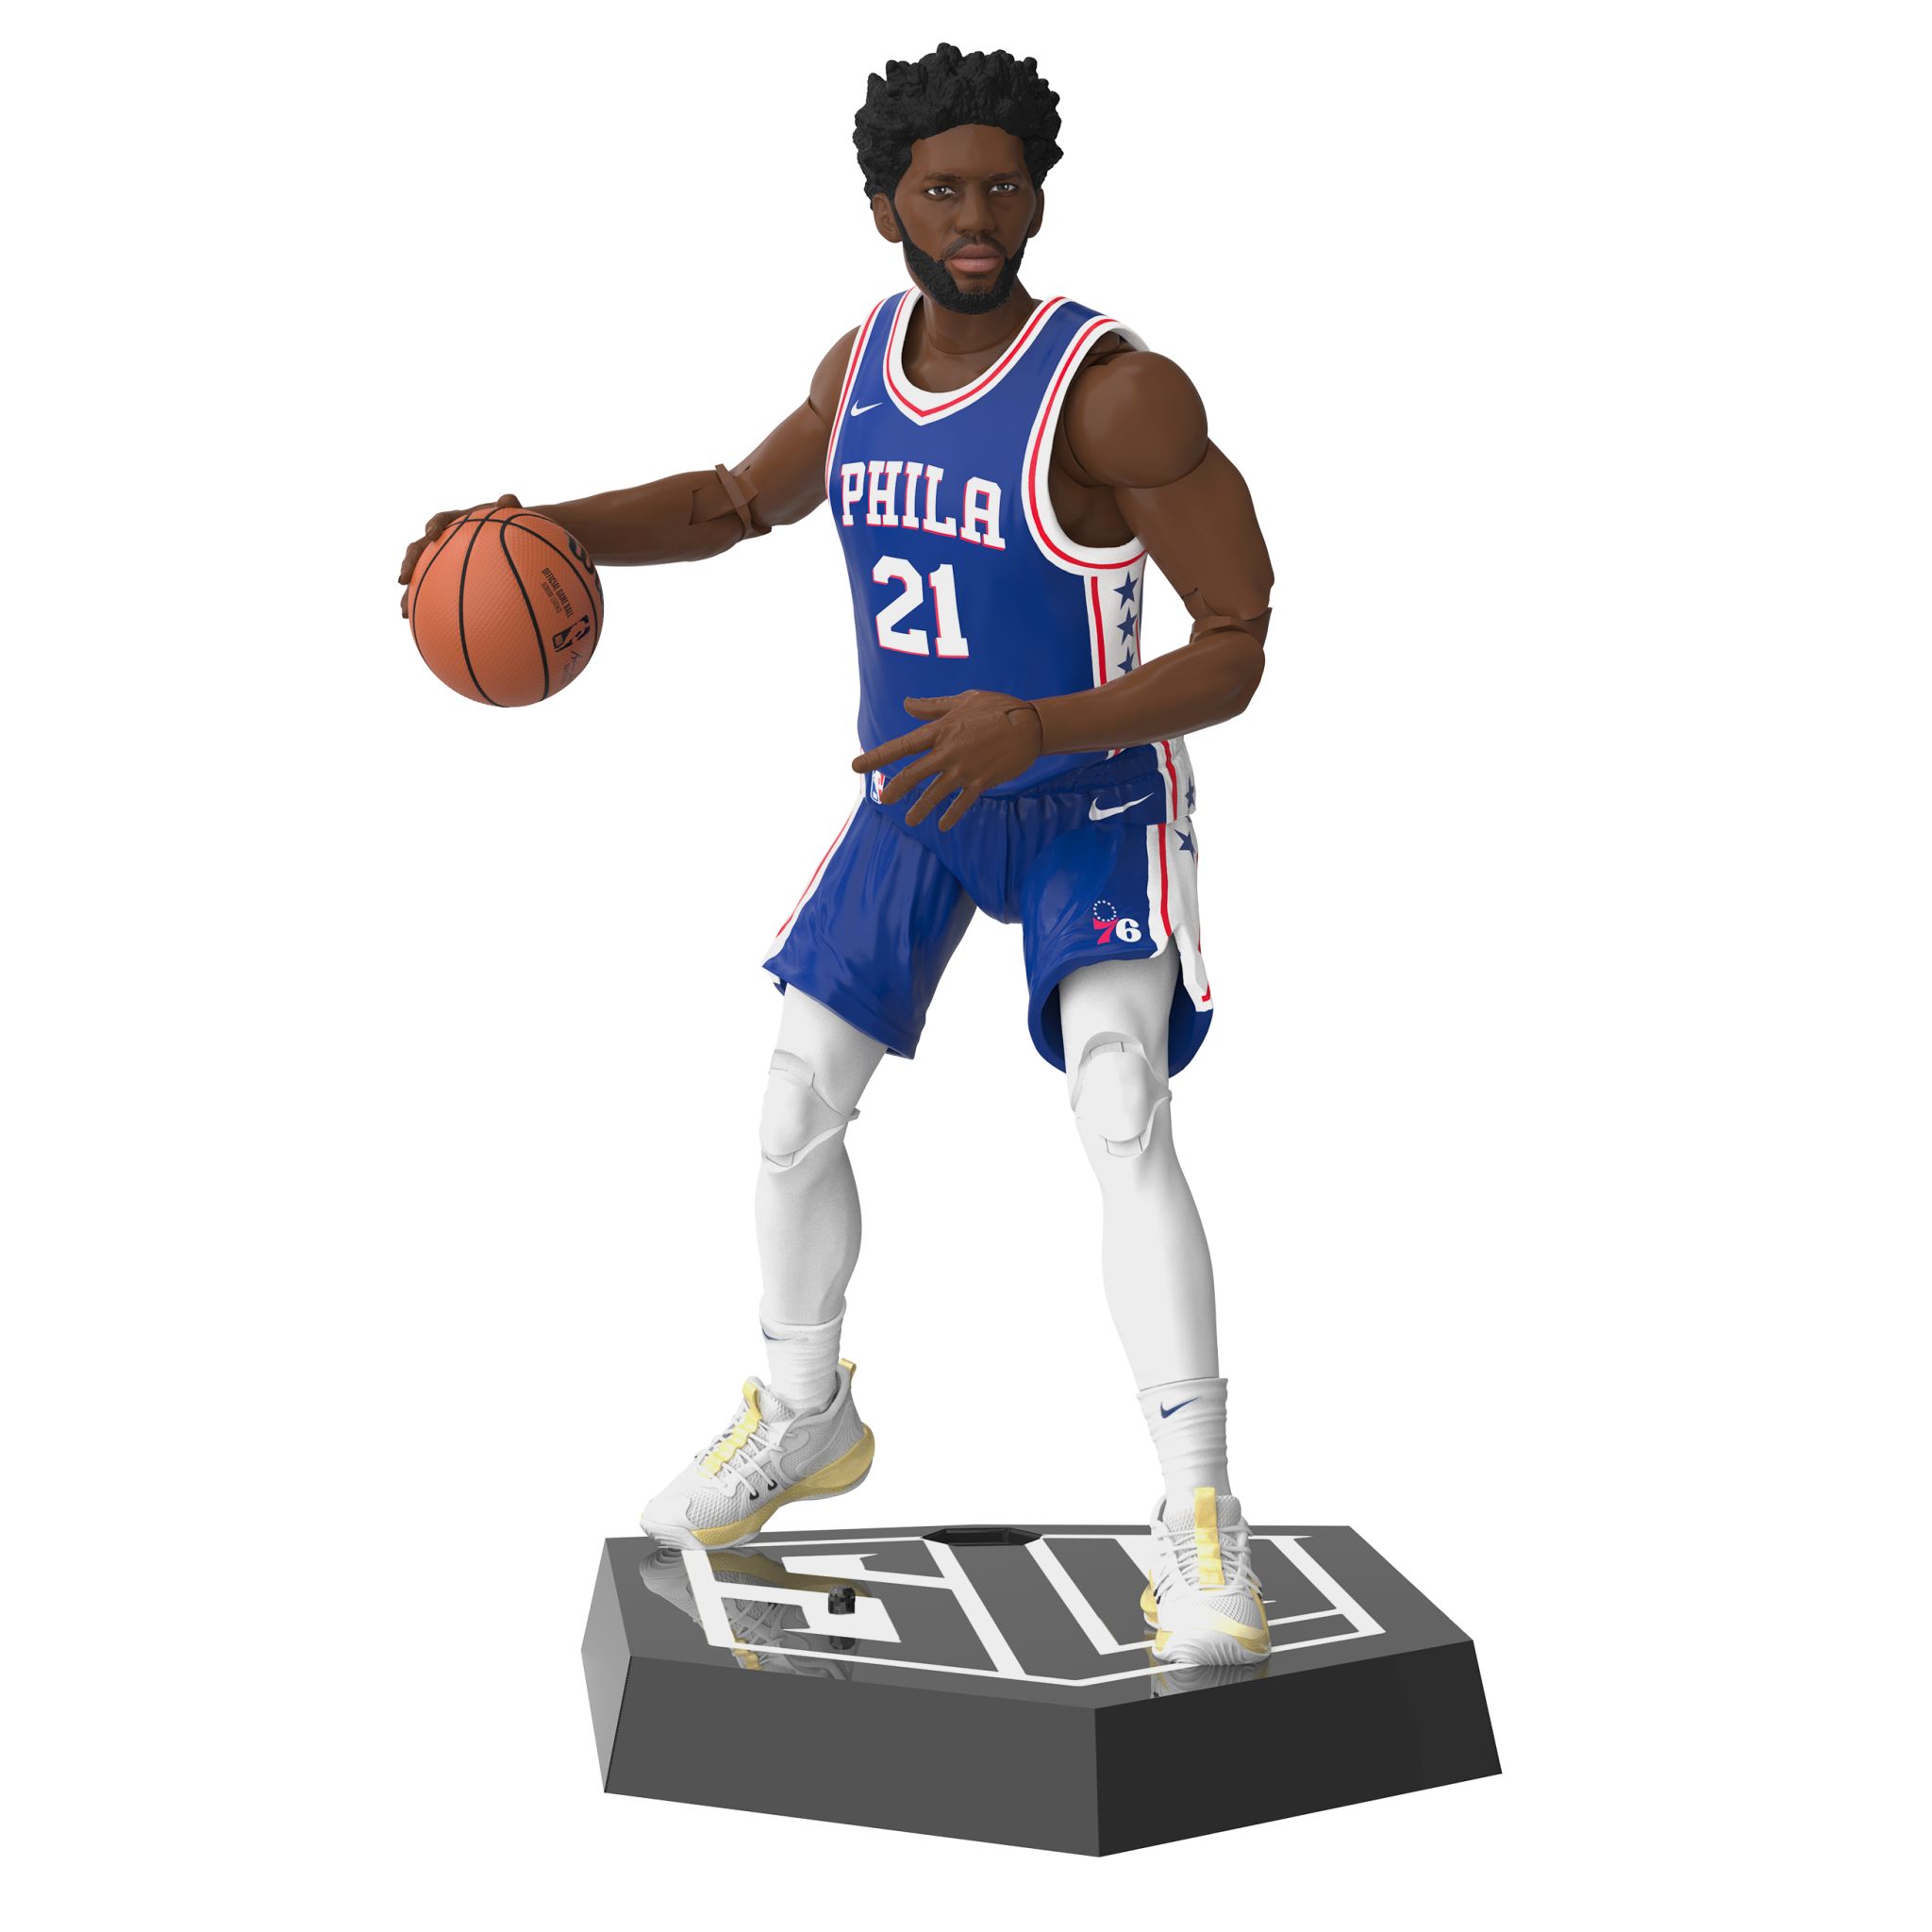 Fanatics launches Starting Lineup x NBA figures, preorders